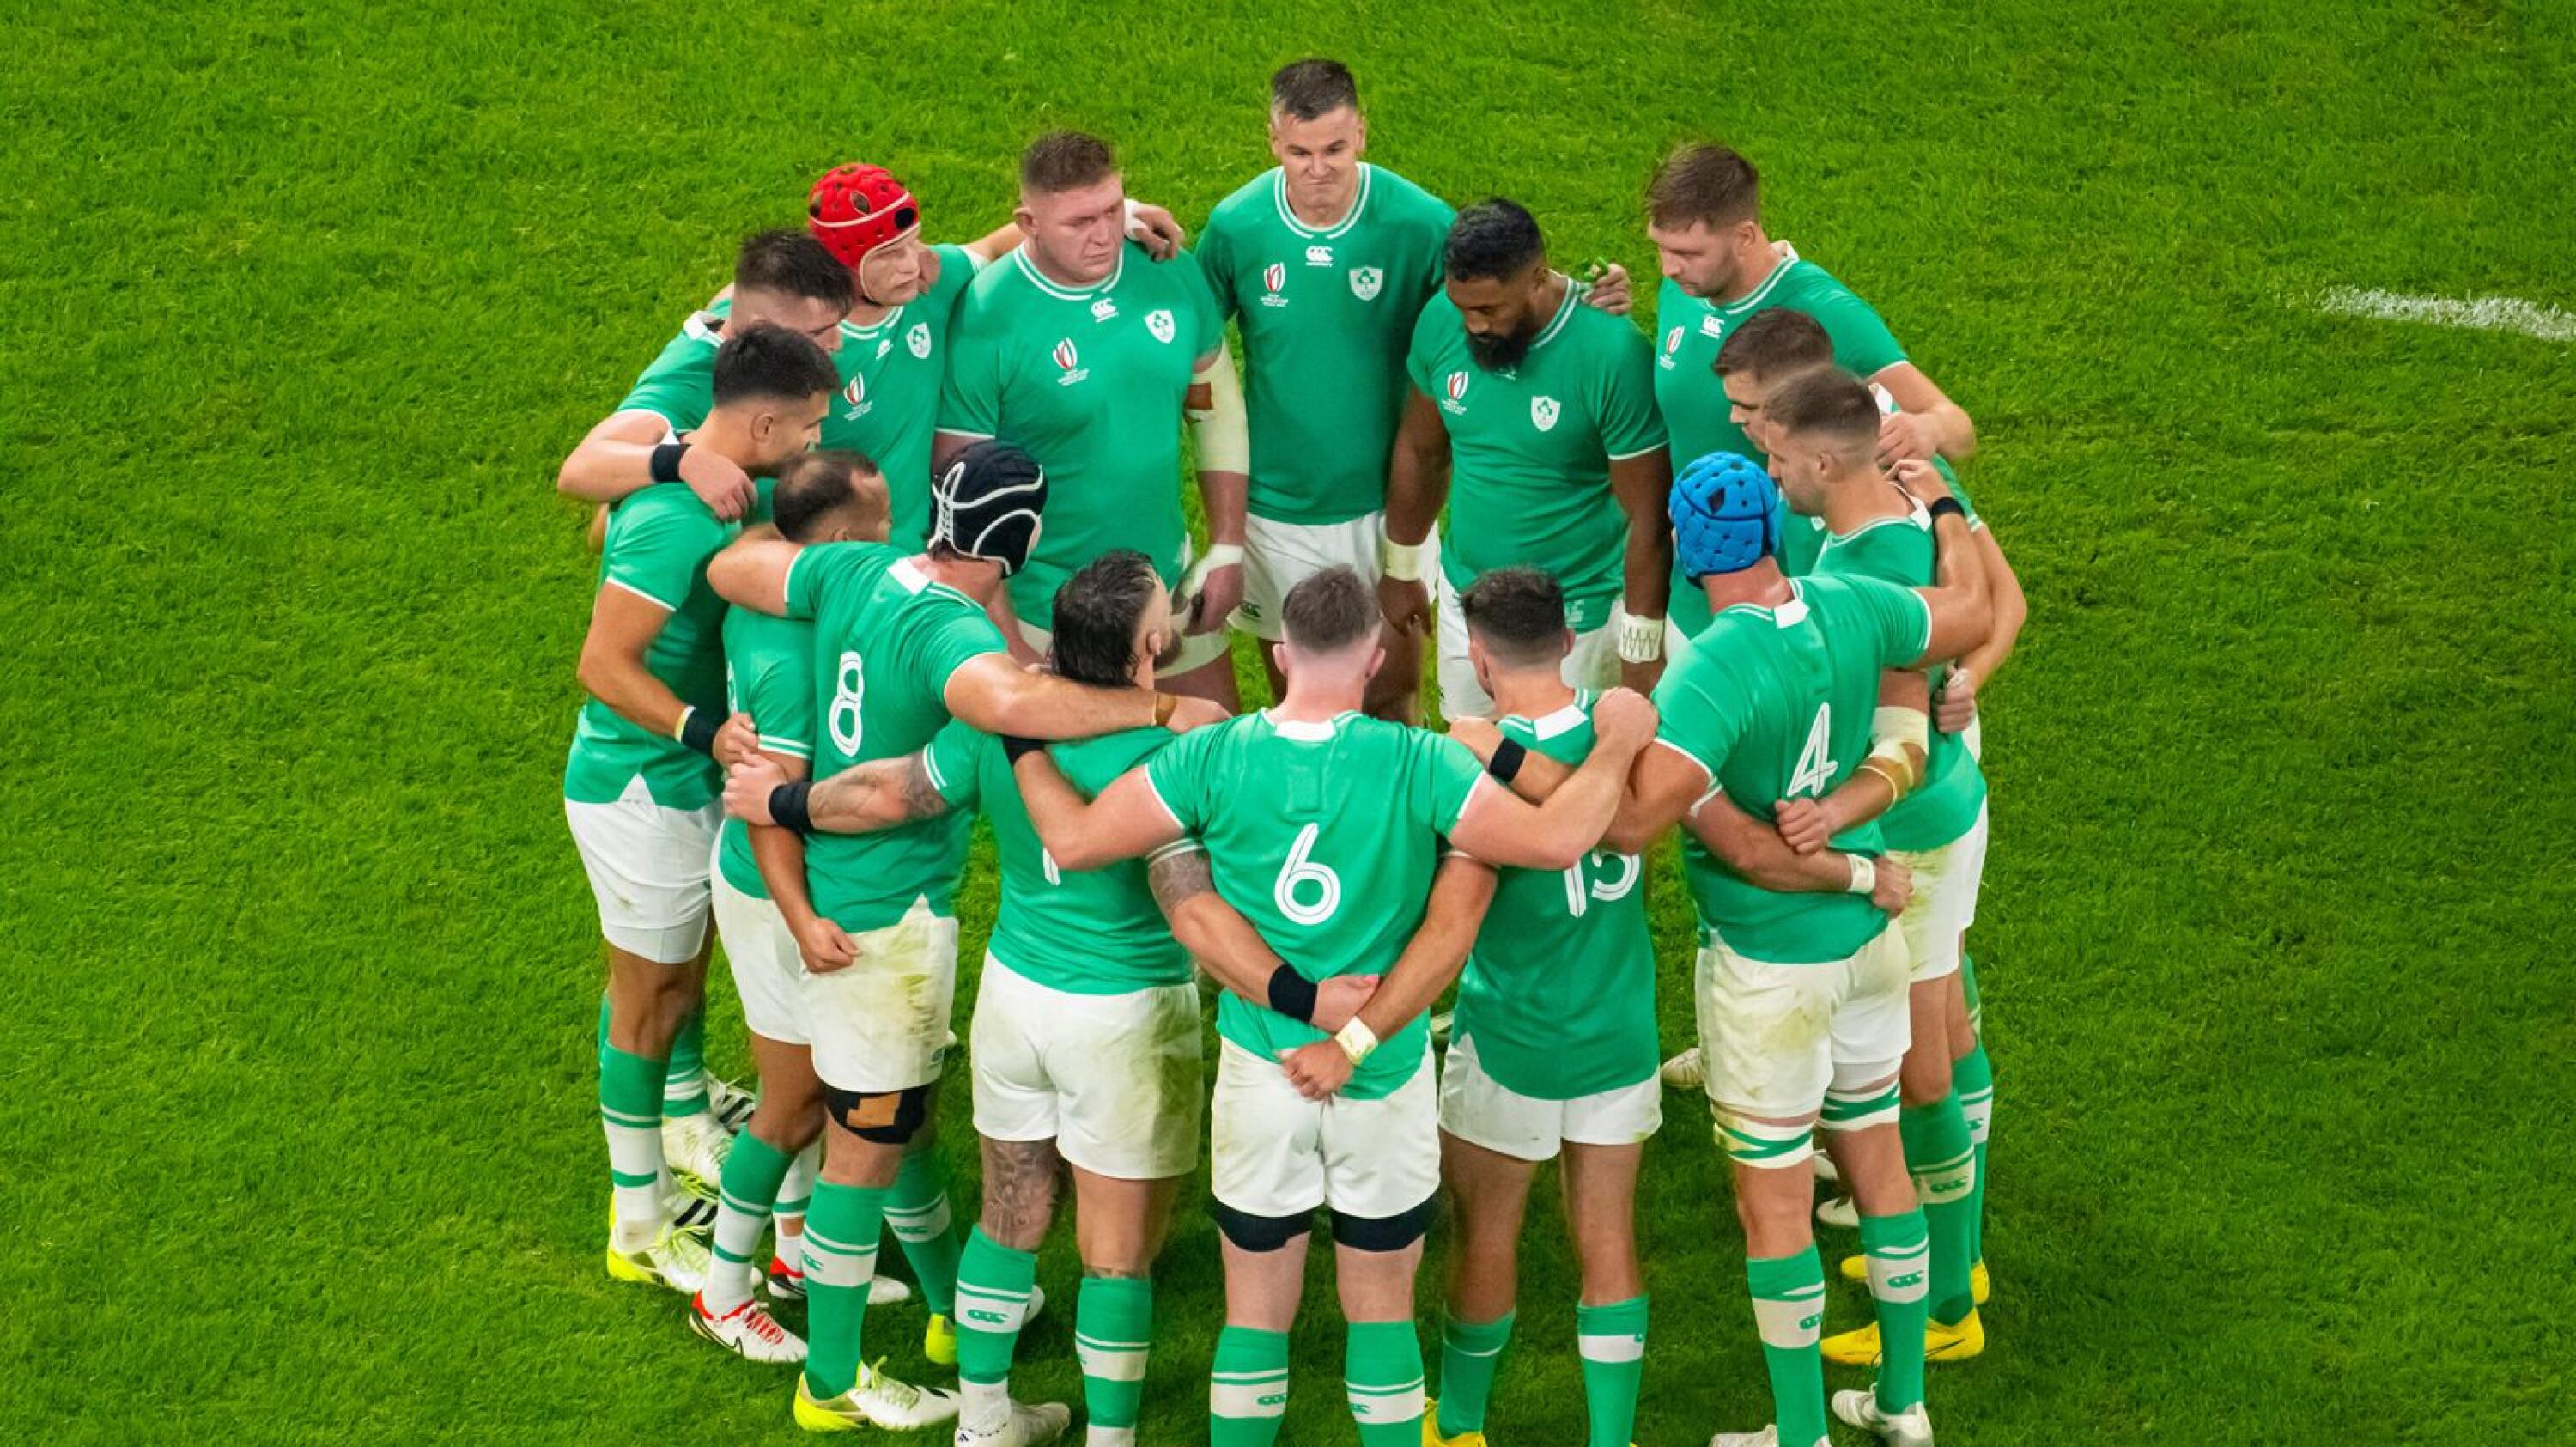 Ireland's flyhalf Jonathan Sexton (C) leads his players as they form a huddle during the France 2023 Rugby World Cup Pool B match between Ireland and Scotland at the Stade de France in Saint-Denis, on the outskirts of Paris